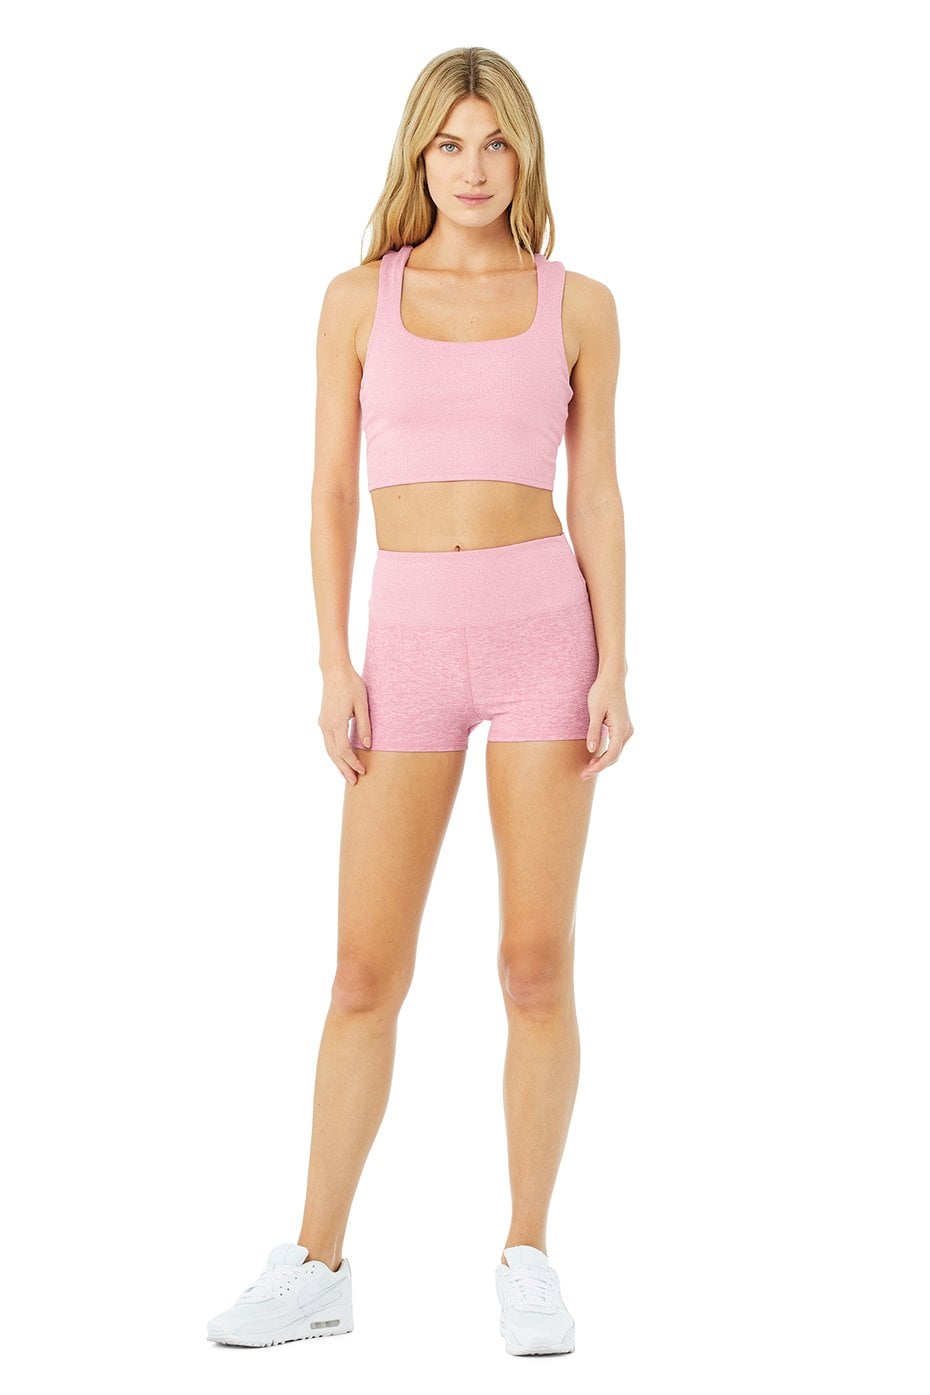 Alo Alosoft Aura Short & Alosoft Ribbed Chic Bra Tank Set, Alo Has a Bunch  of Cute Sets You Can Both Work Out and Lounge In